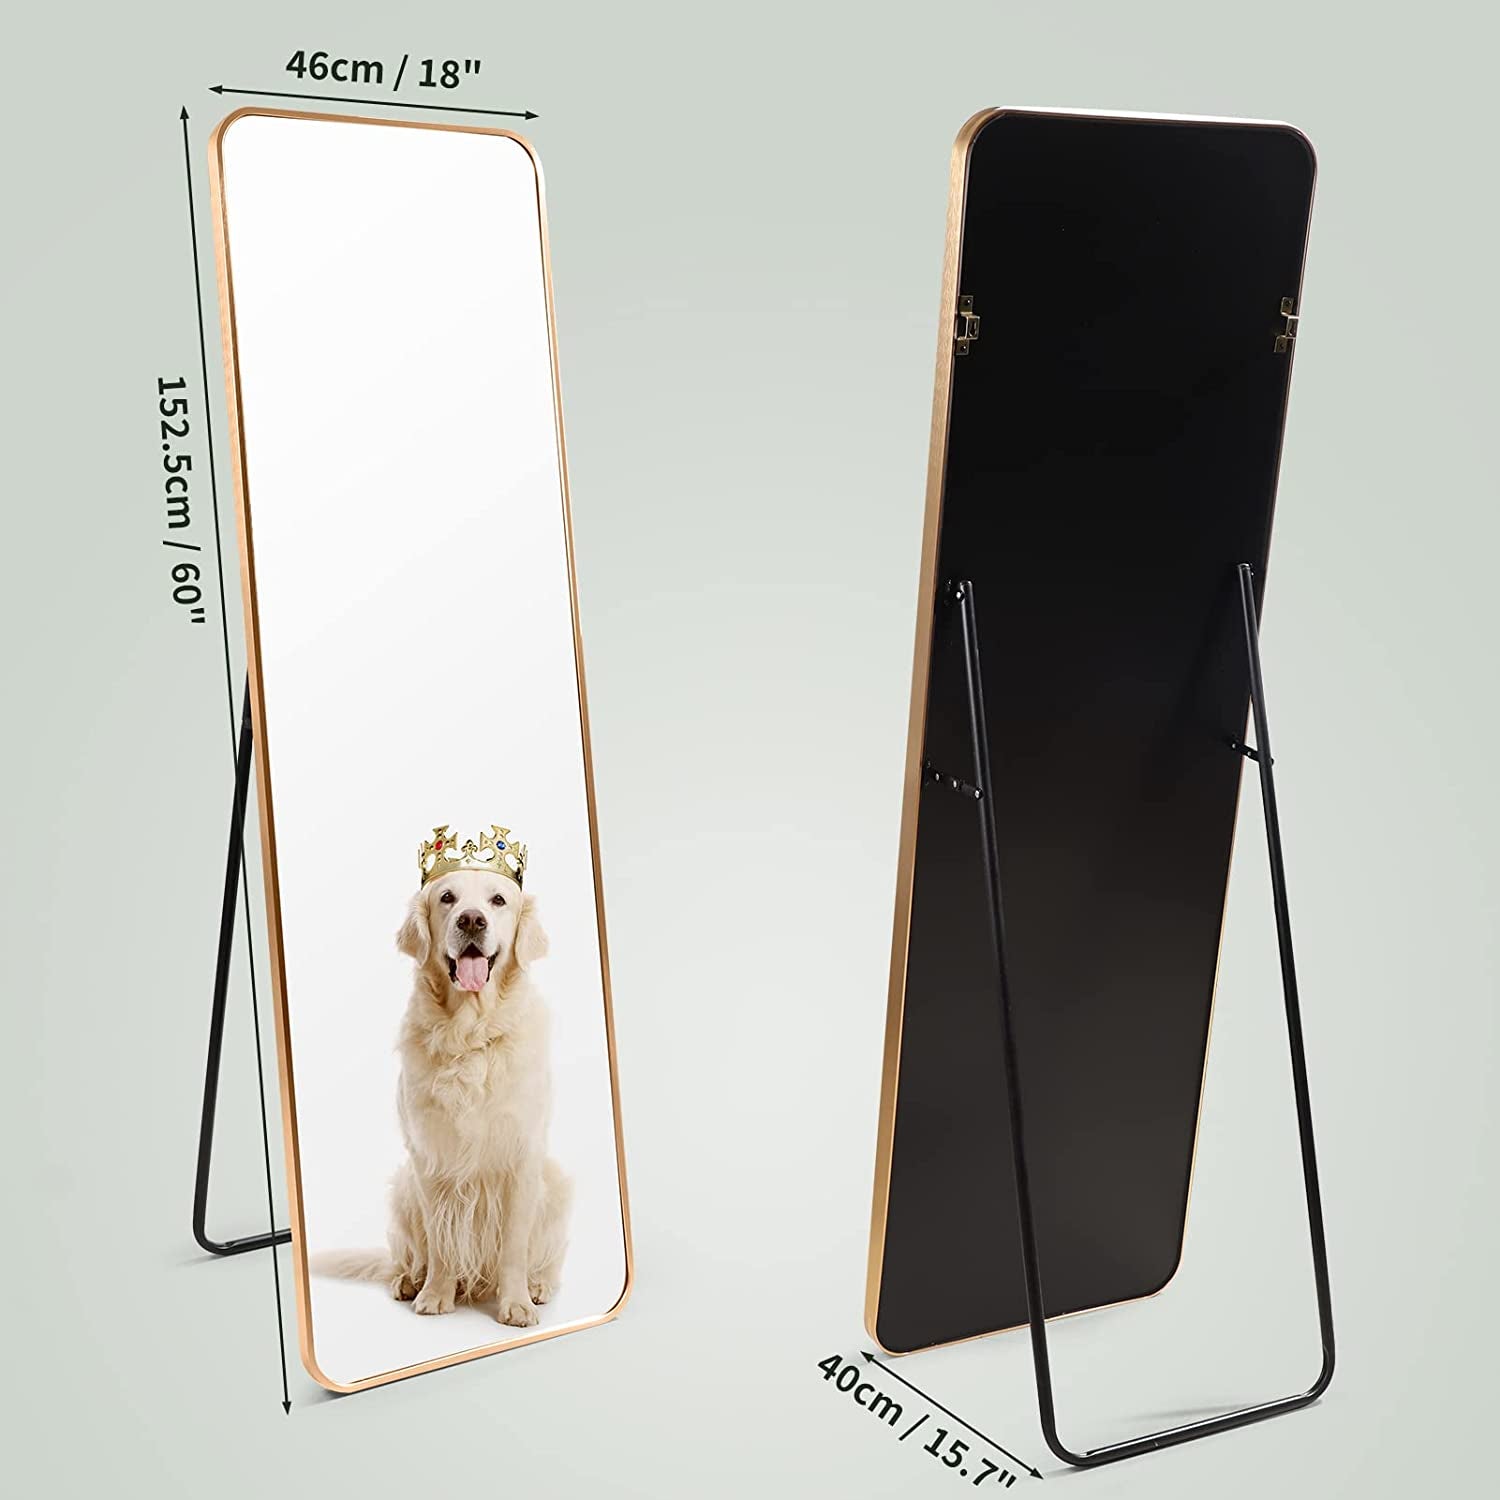 Gold Full Length Floor Mirror with Aluminum Frame for Wall Mounted,  Standing, Leaning, 60X18 Full Body Large Mirror for Dressing Room,  Bedroom